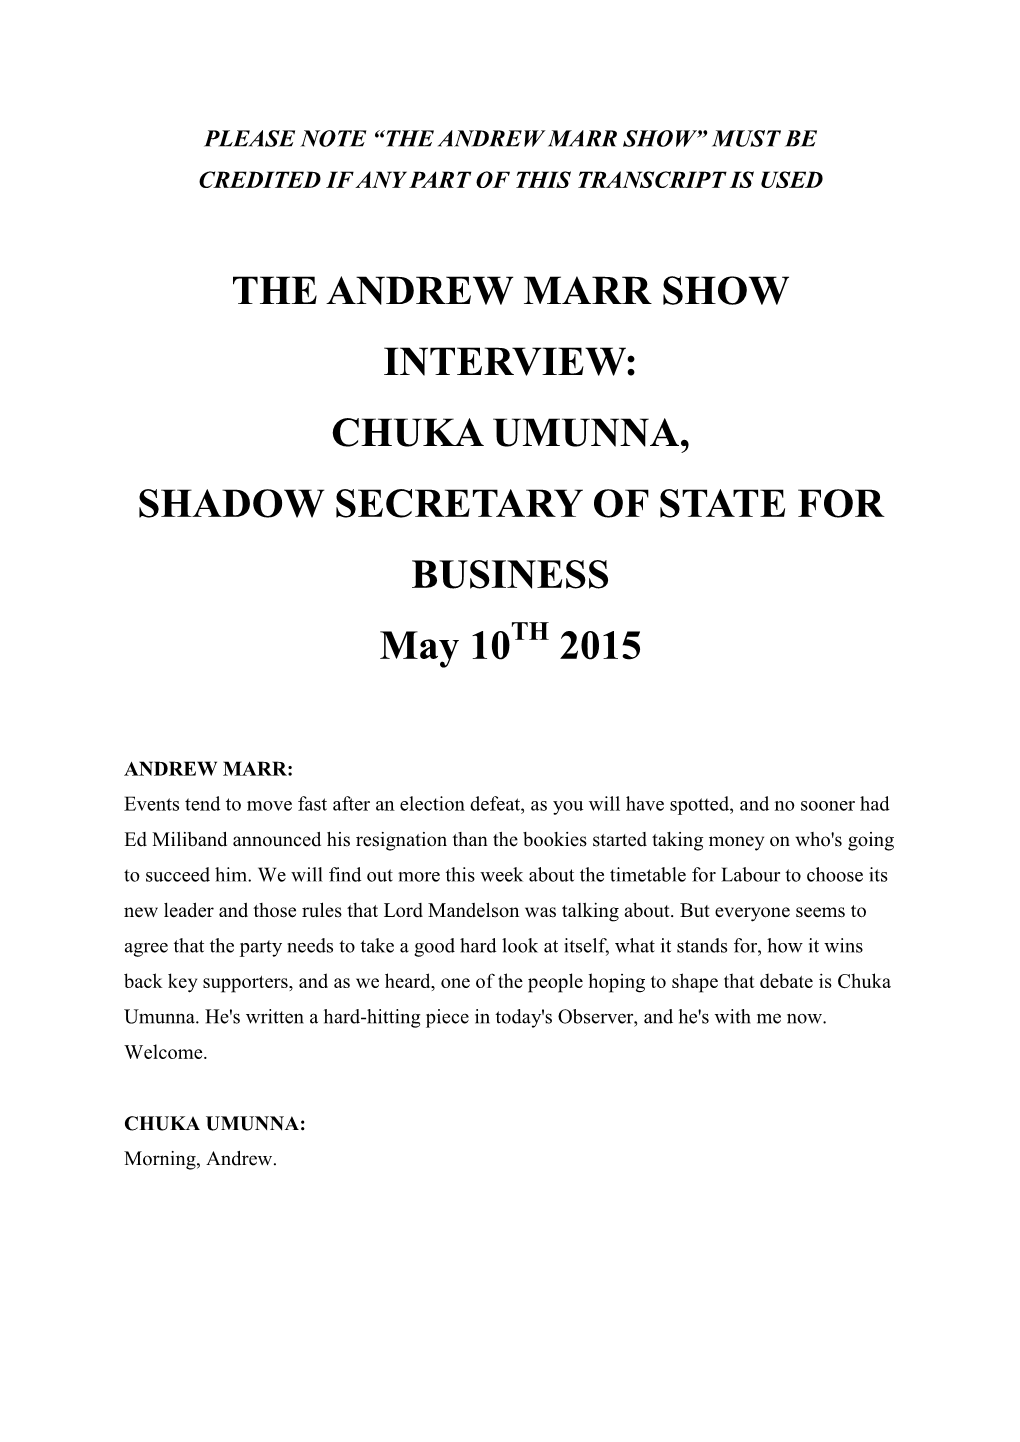 THE ANDREW MARR SHOW INTERVIEW: CHUKA UMUNNA, SHADOW SECRETARY of STATE for BUSINESS May 10 2015